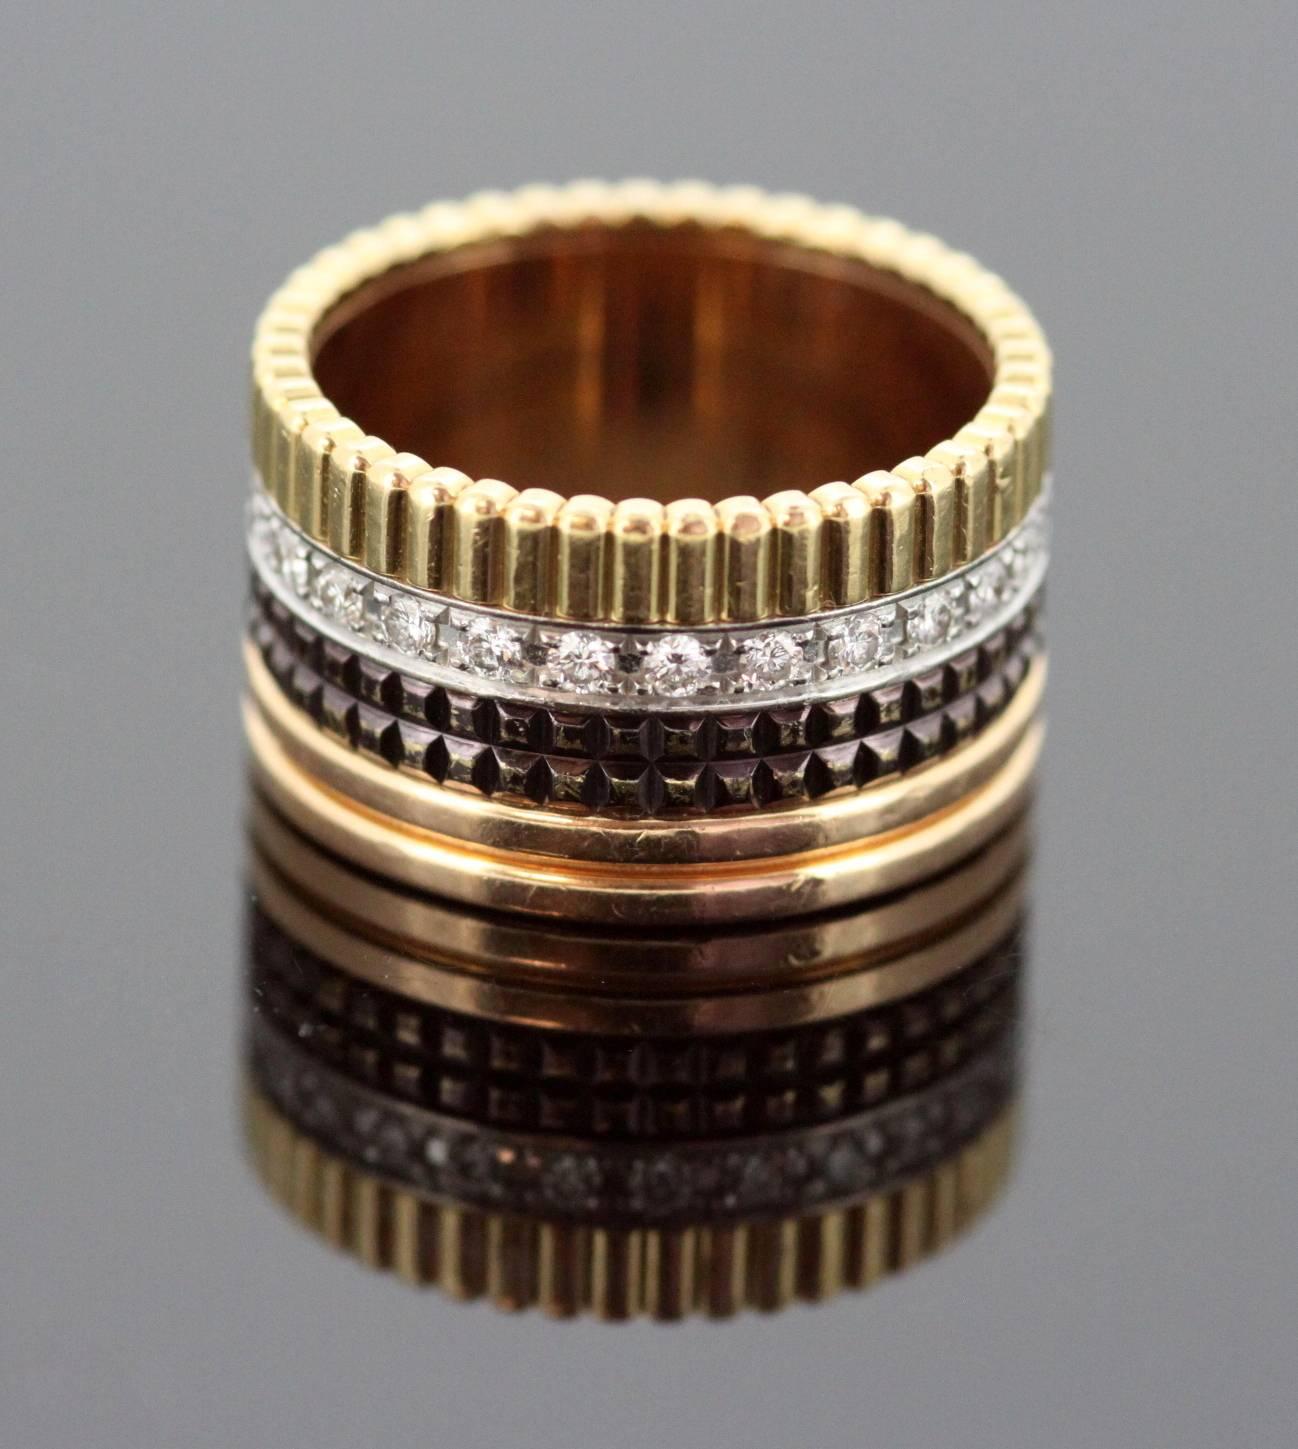 Quatre large model ring in 3 golds, PVD and diamonds
Designer: Boucheron
France Circa.2010
Fully hallmarked.

Approx Dimensions - 
Diameter x Width: 2 x 1.15 cm
Finger Size UK: N US: 7 EU: 54
Weight : 14 grams
Expert : Thierry Stetten
Collection :